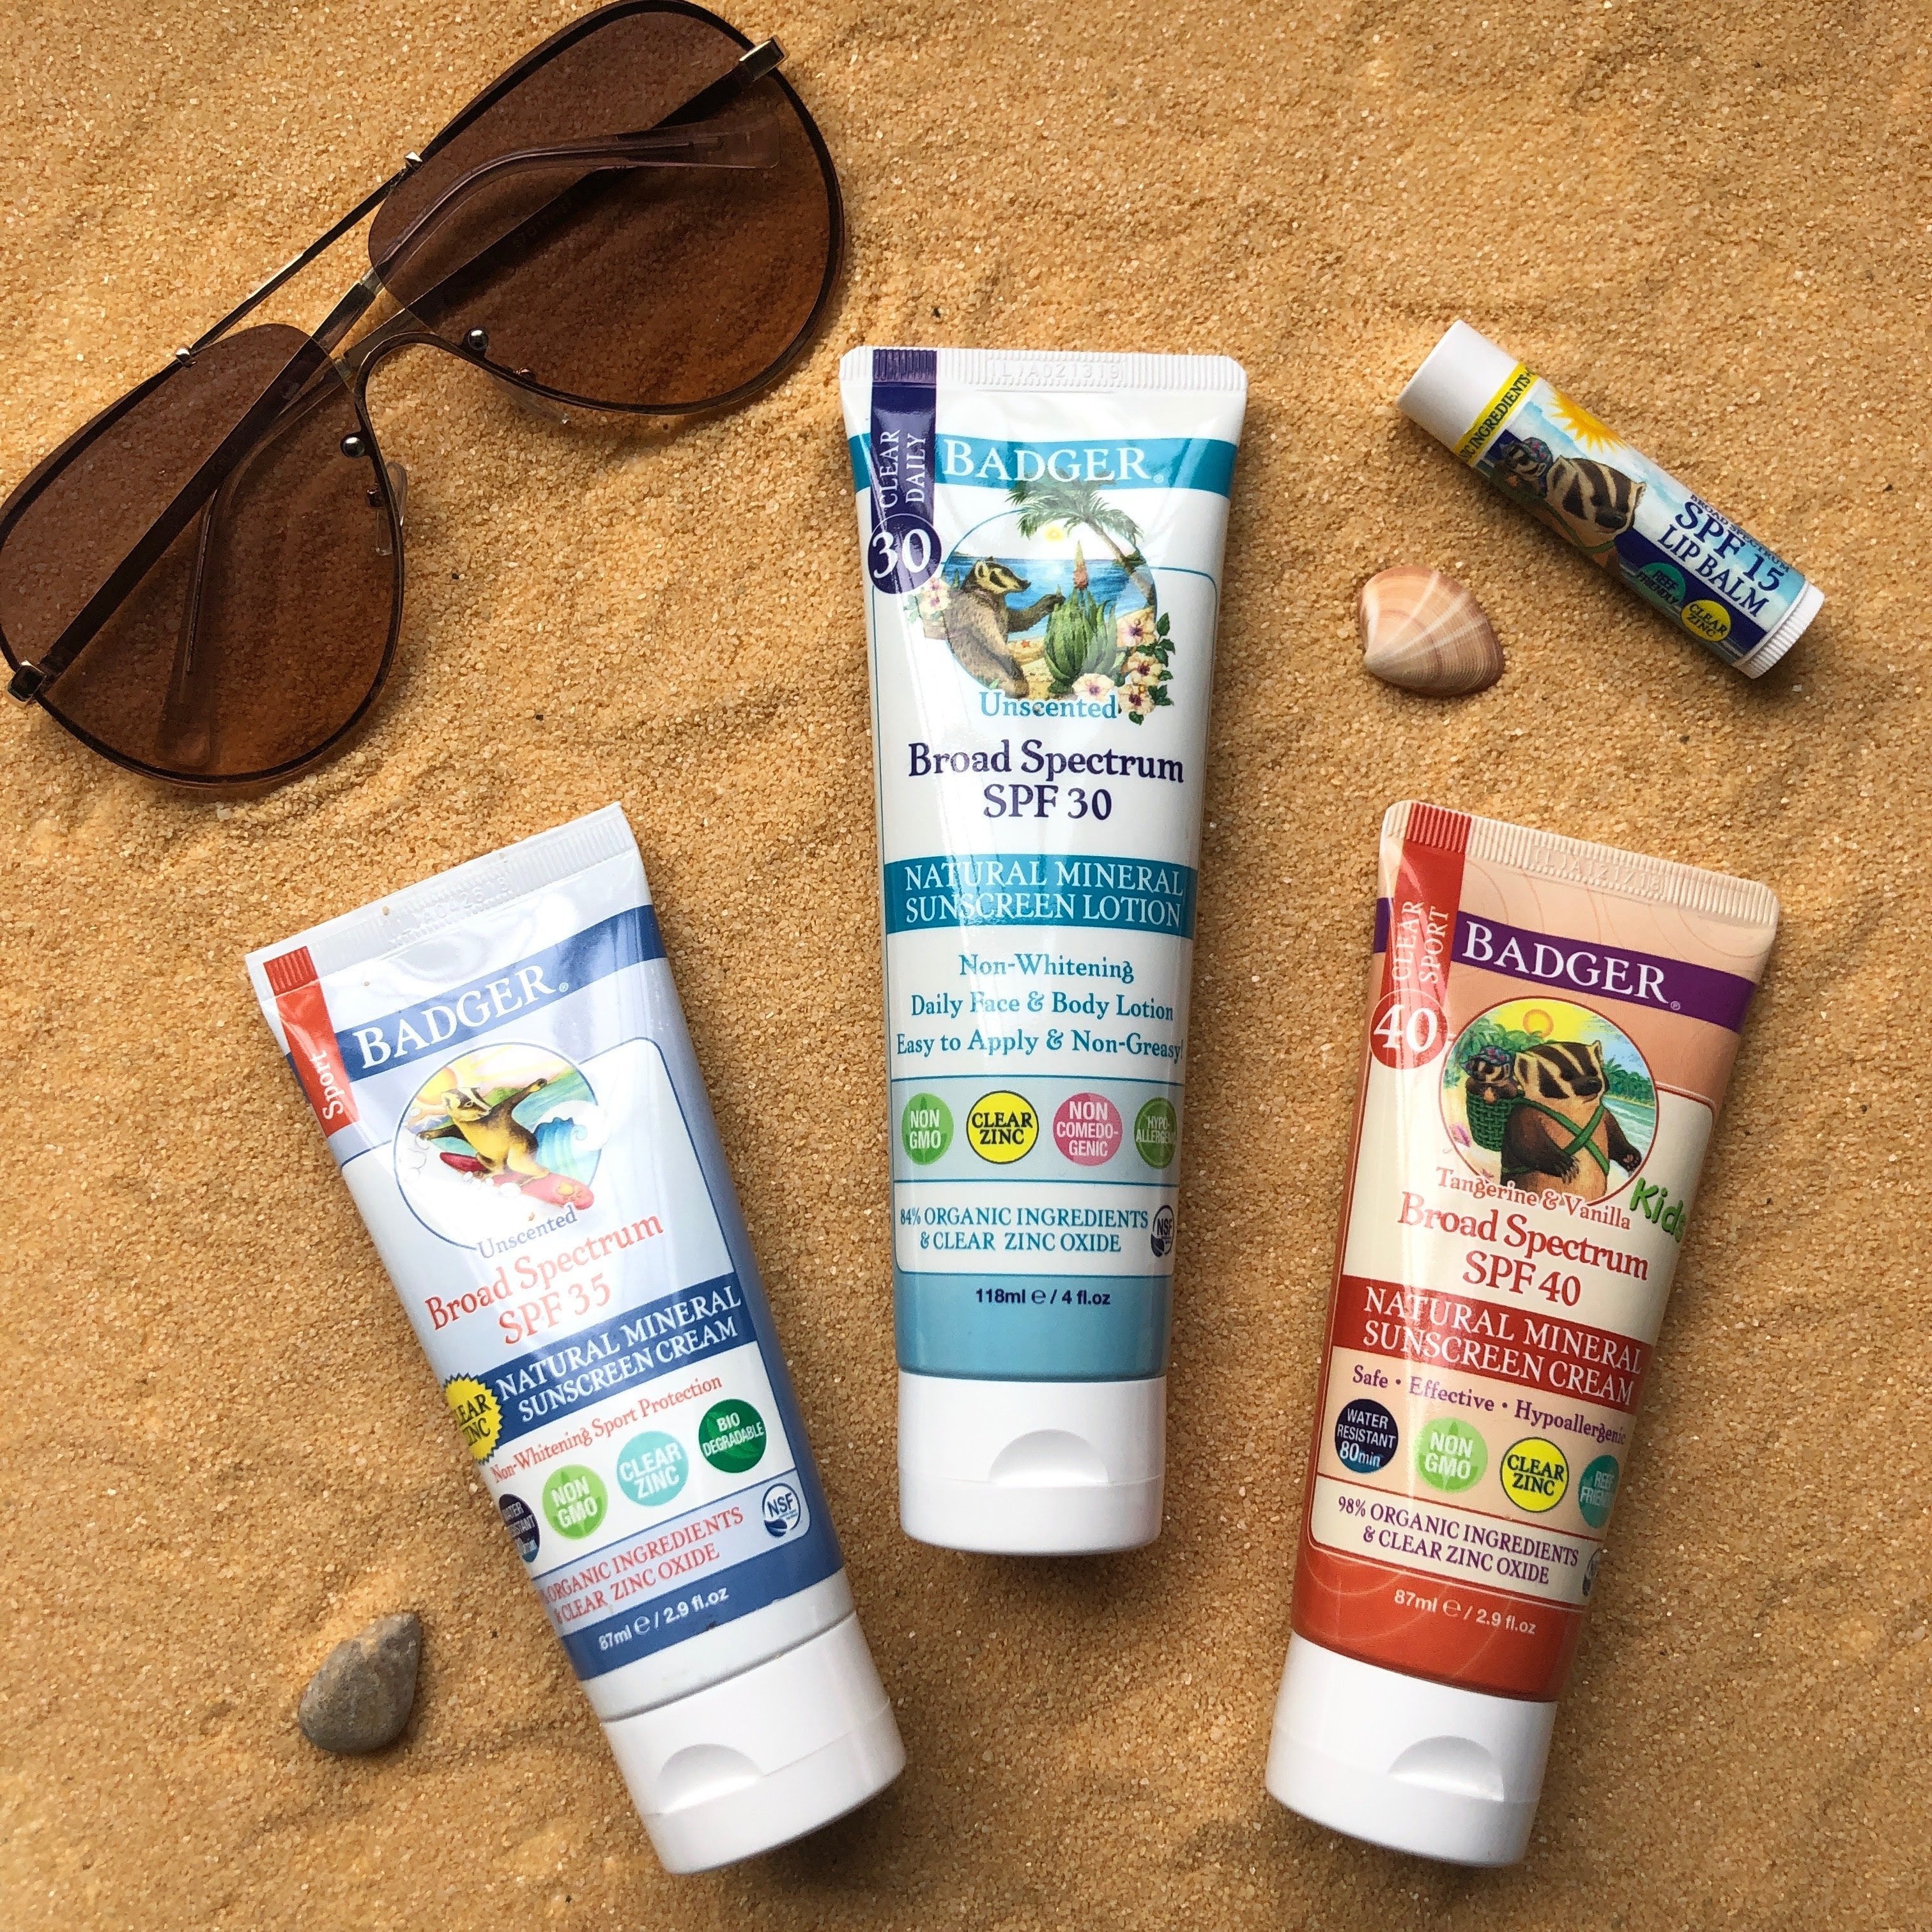 Be Ready For Spring Break With Safe Sun Protection!